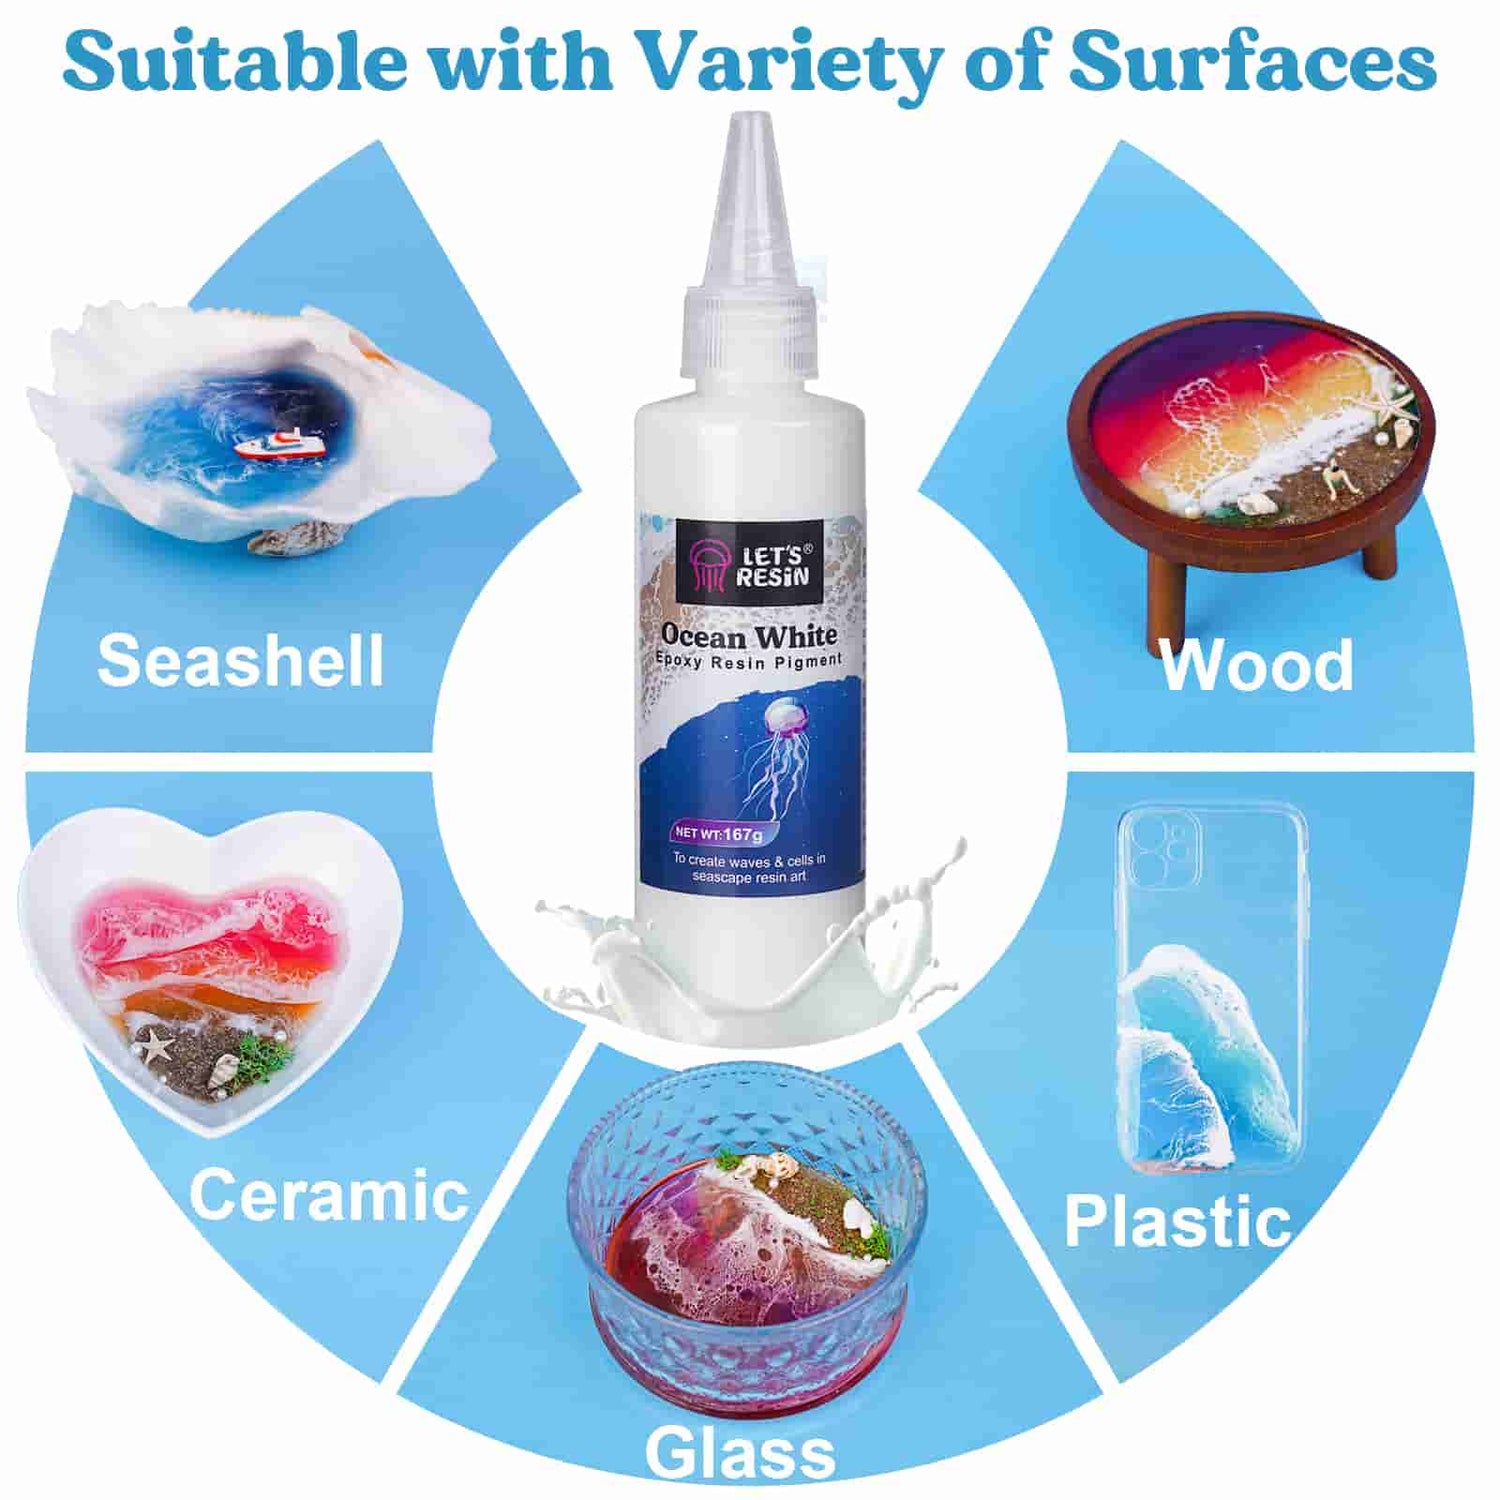 Let's Resin Epoxy Resin Dye,15 Color Translucent Epoxy Resin Pigment,Non-Toxic Concentrated Epoxy Resin Paint Each 0.35oz,Liquid Resin Colorant for